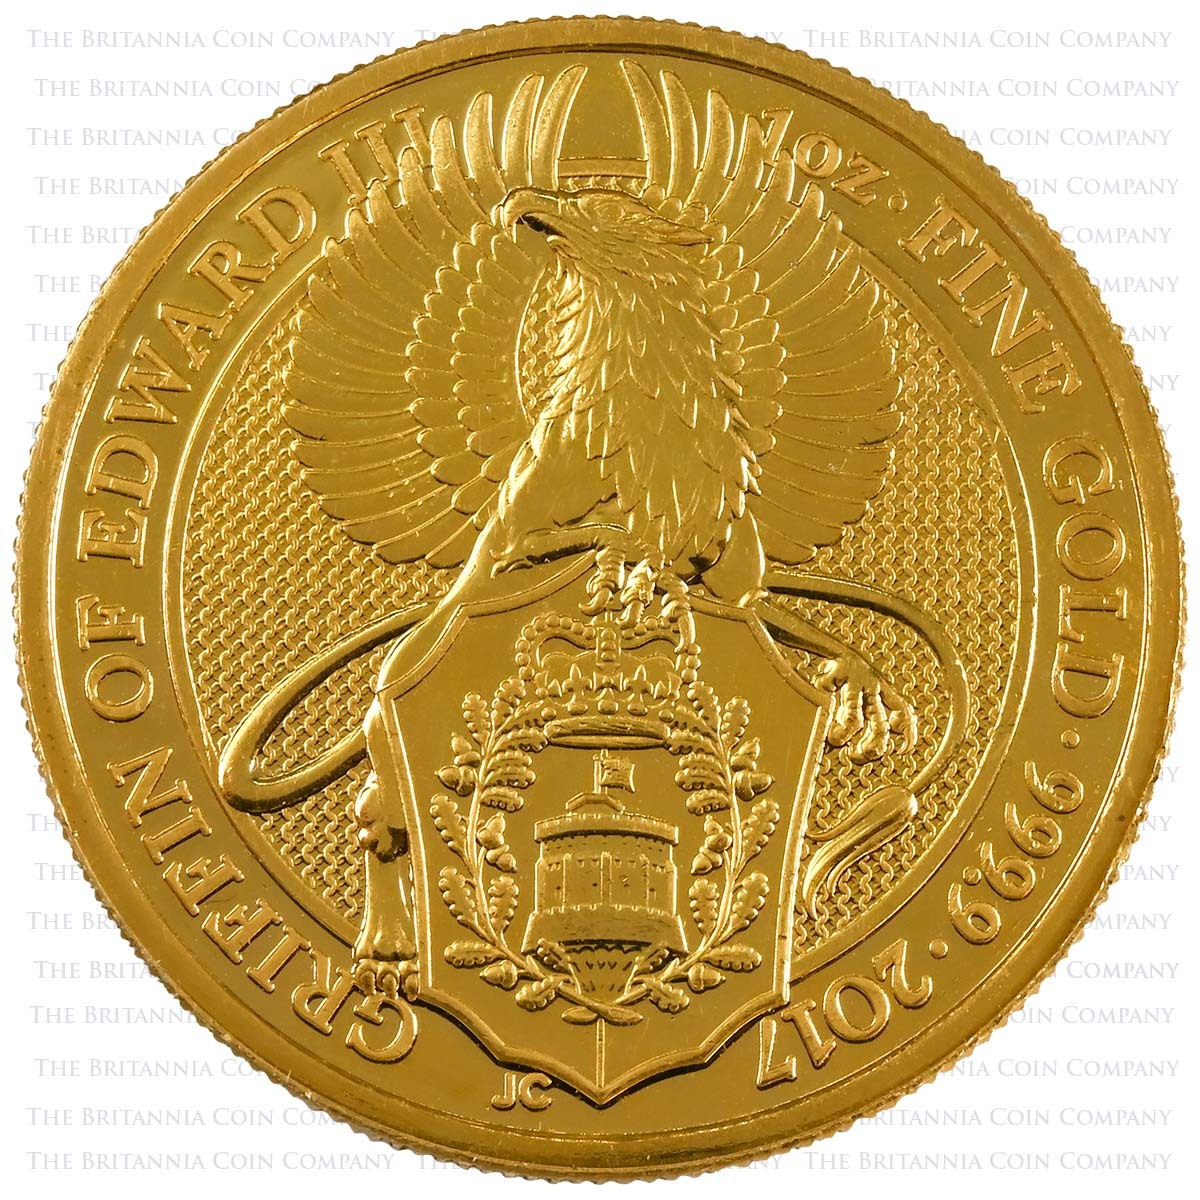 2017 Queen's Beasts Griffin of Edward III 1 Ounce Gold Bullion Reverse